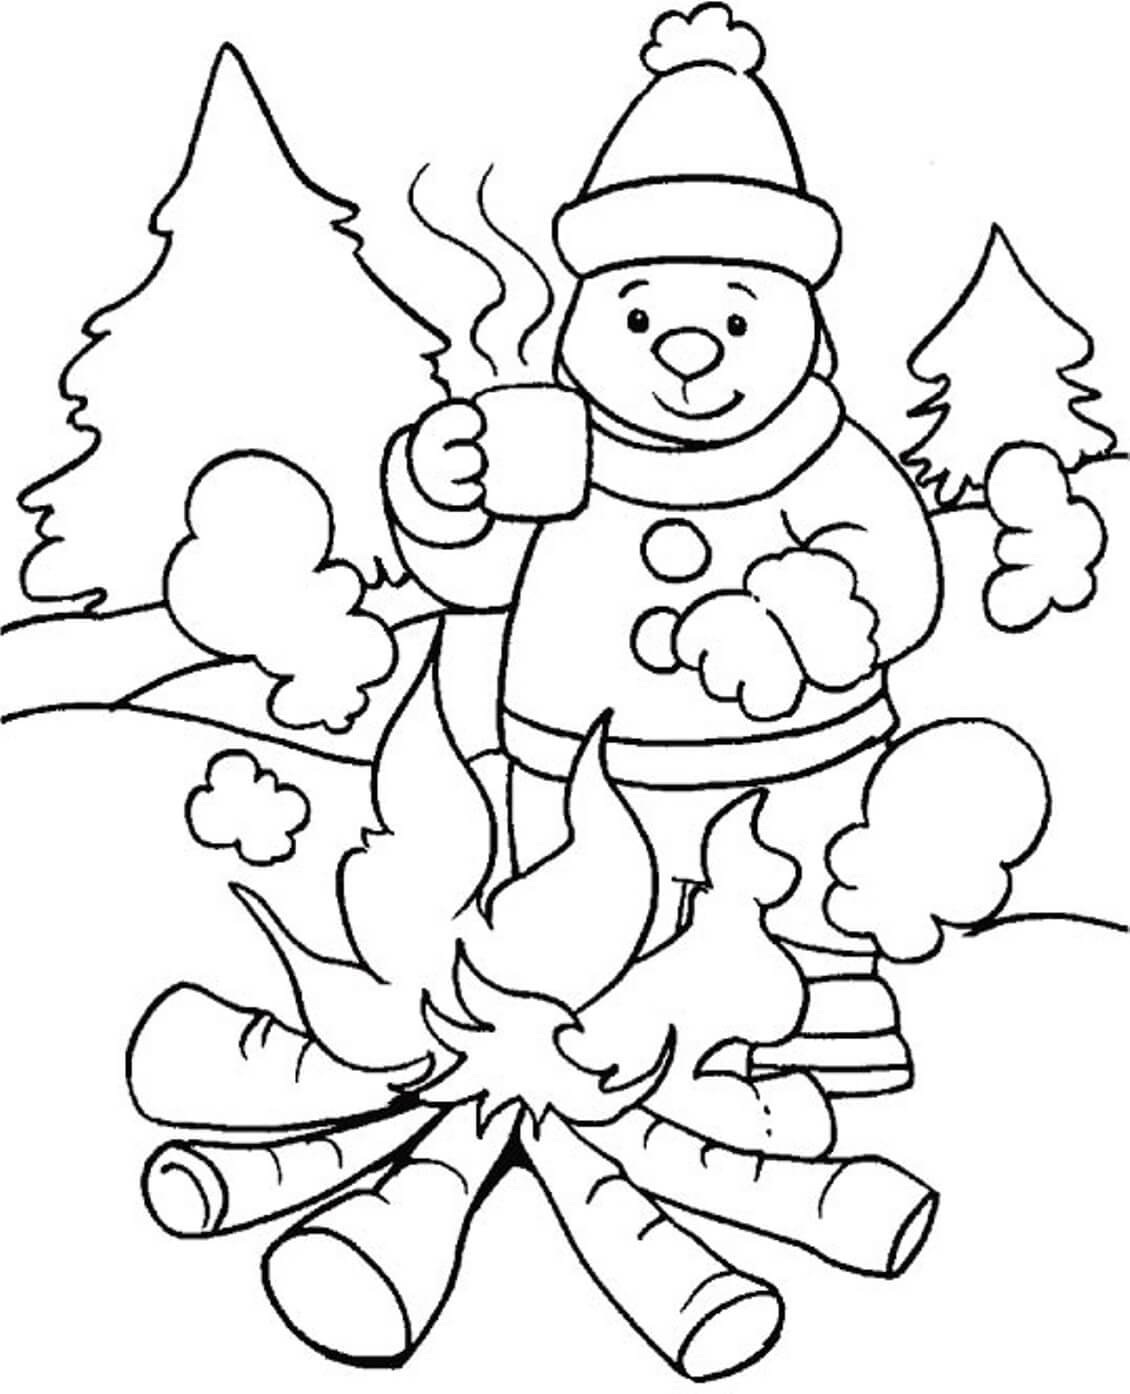 Free Printable Winter Scene Coloring Pages